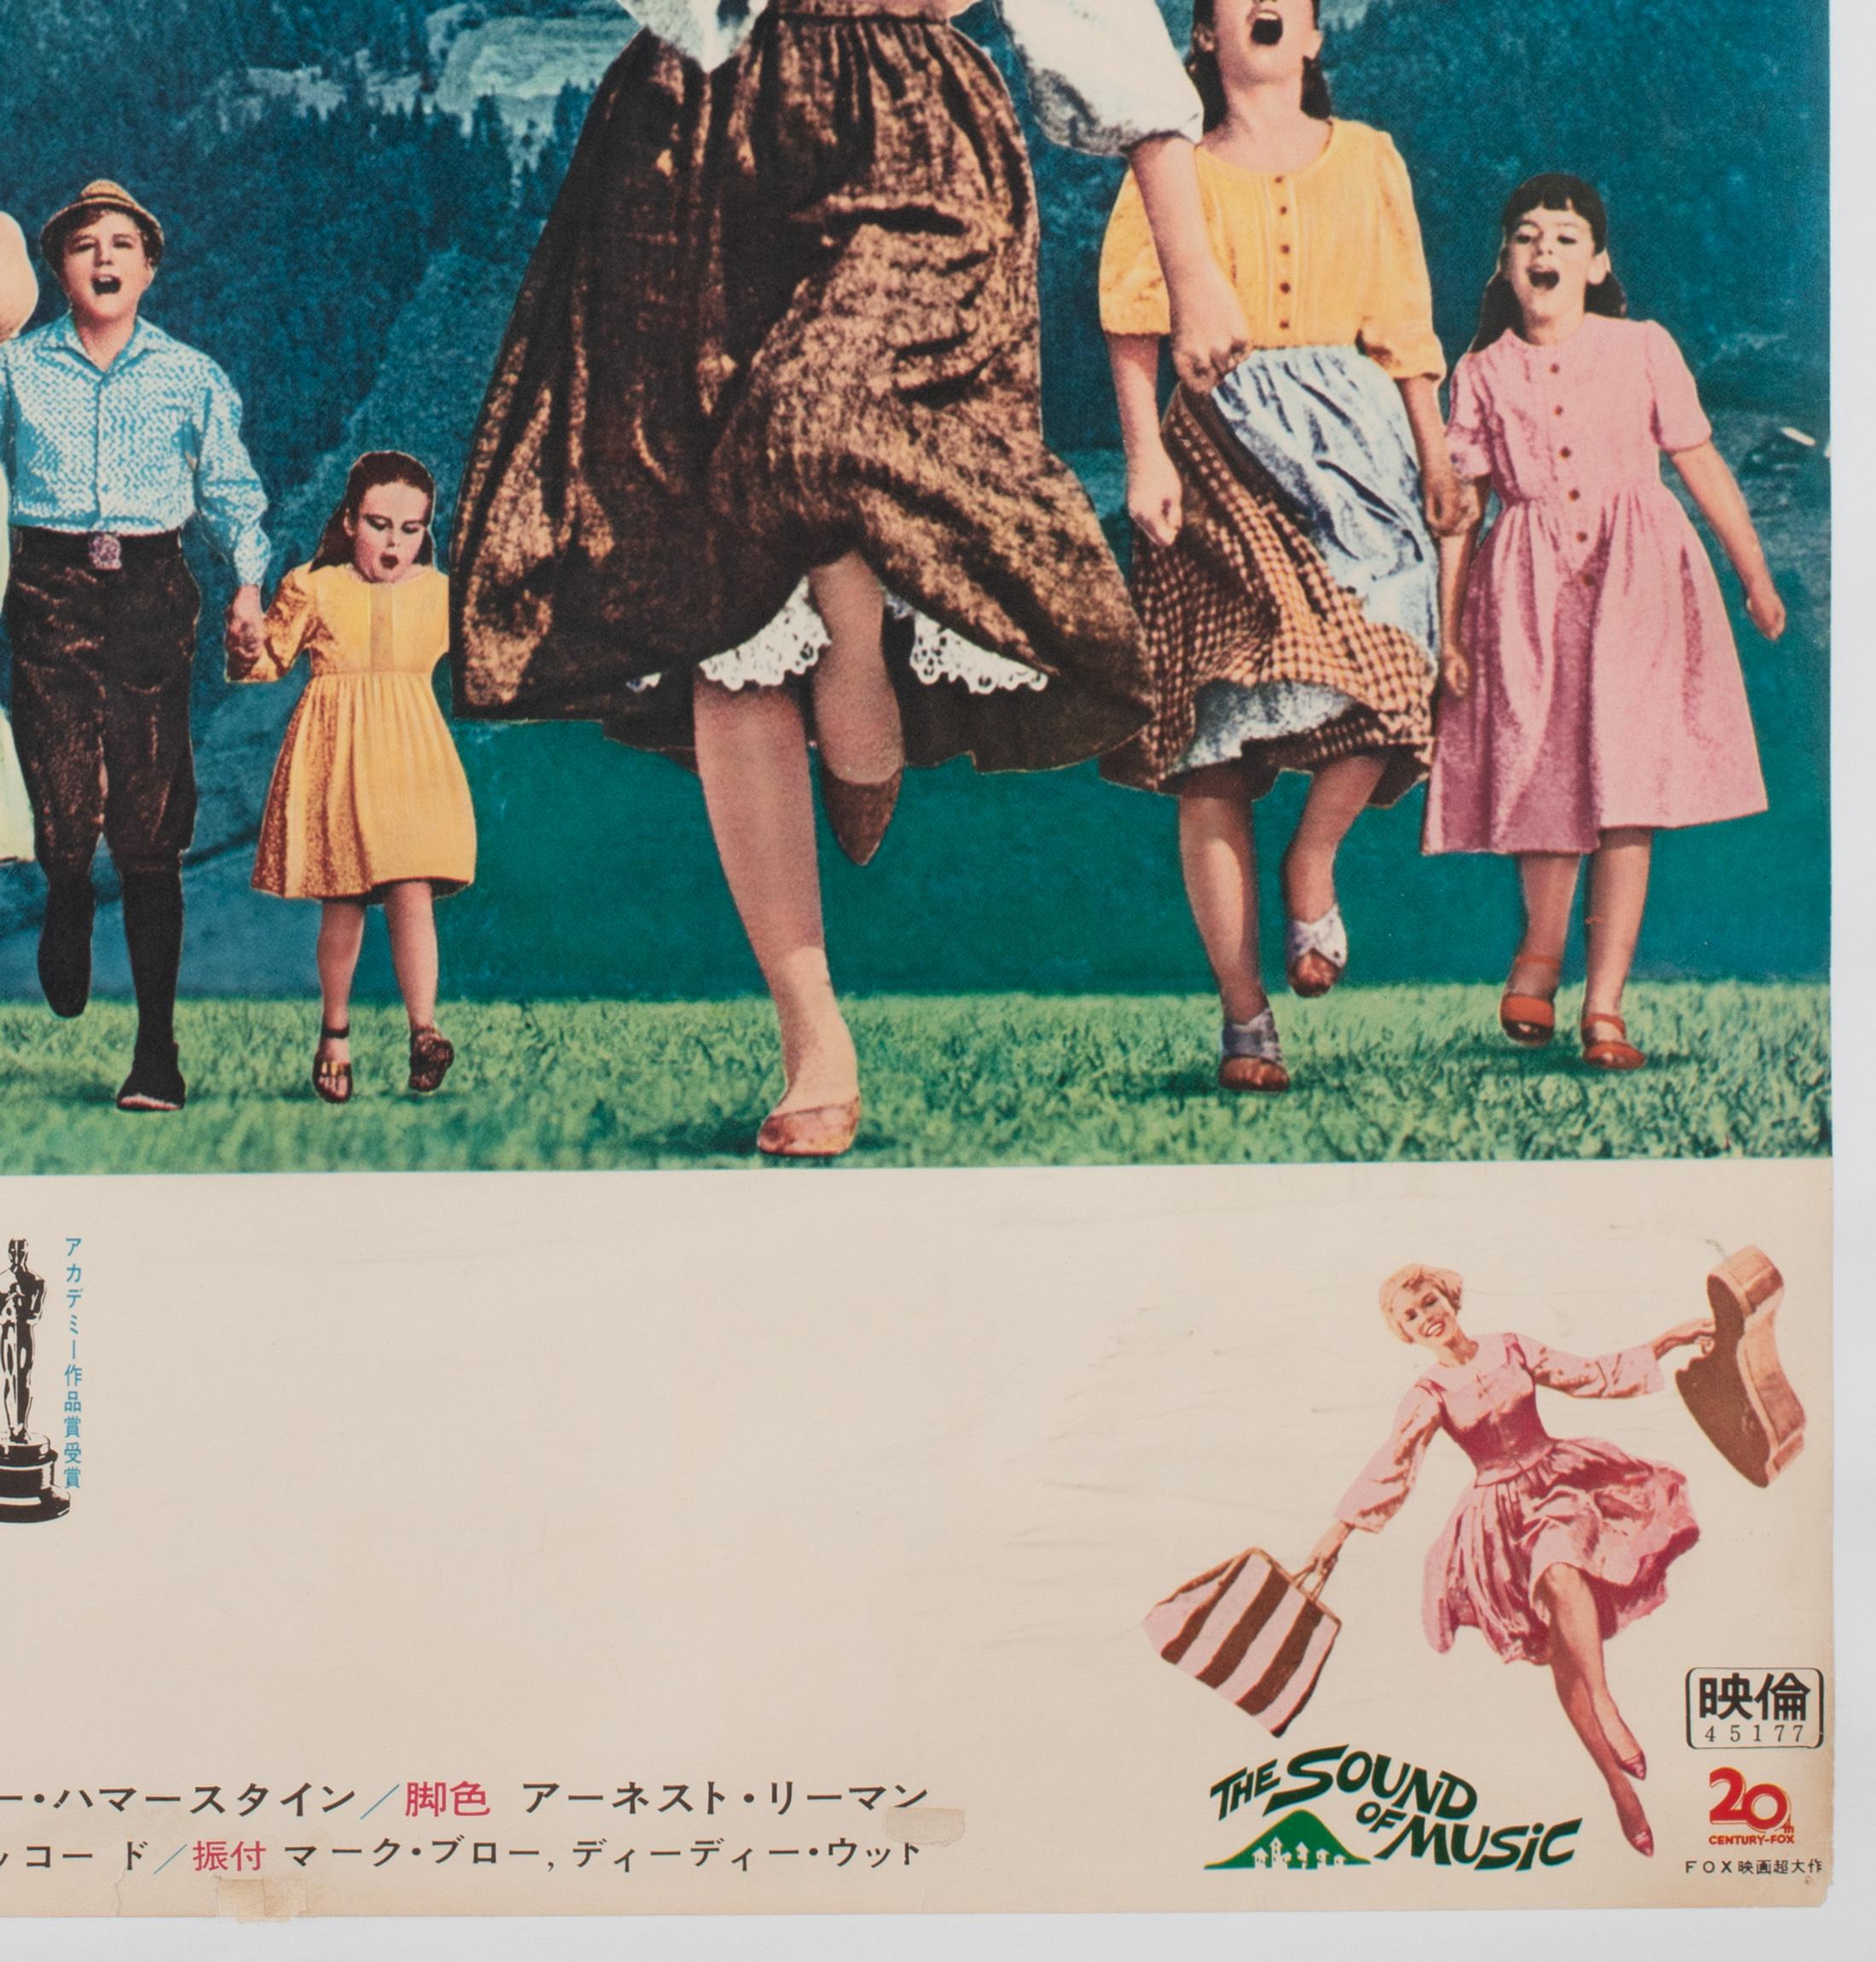 The Sound of Music R1970 Japanese B2 Film Poster 1